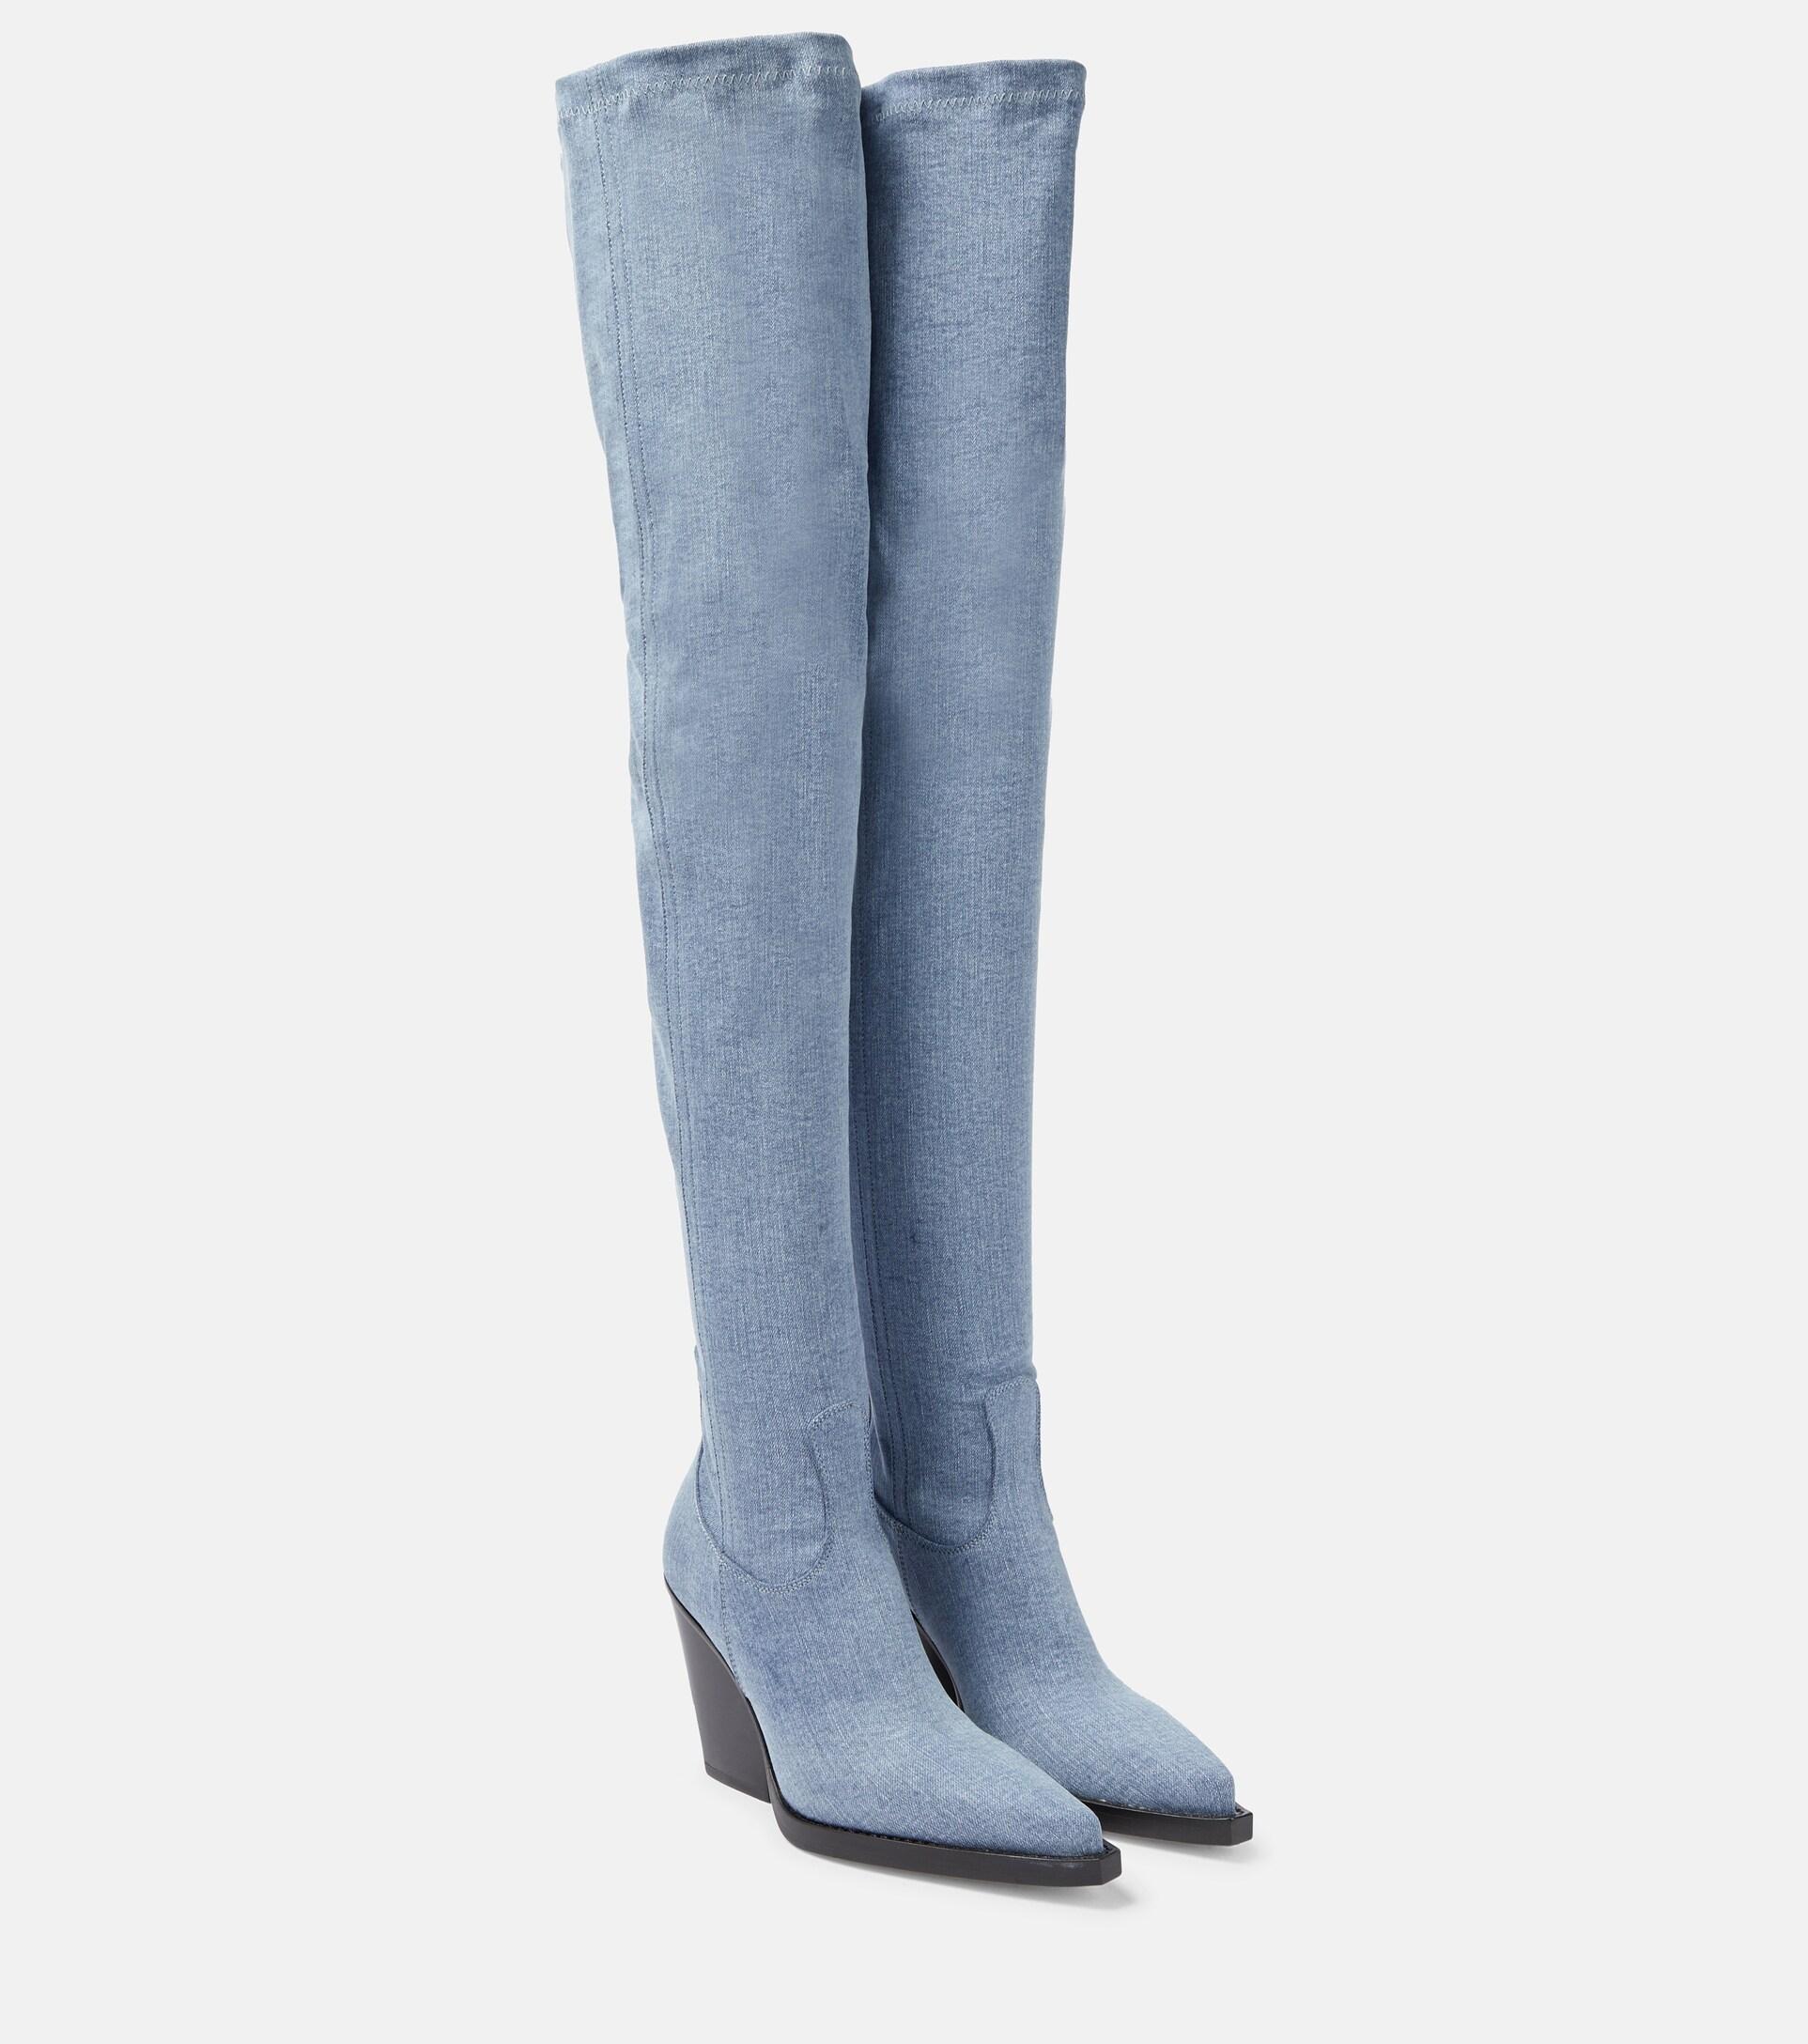 Paris Texas Denim Over-the-knee Cowboy Boots in Blue | Lyst